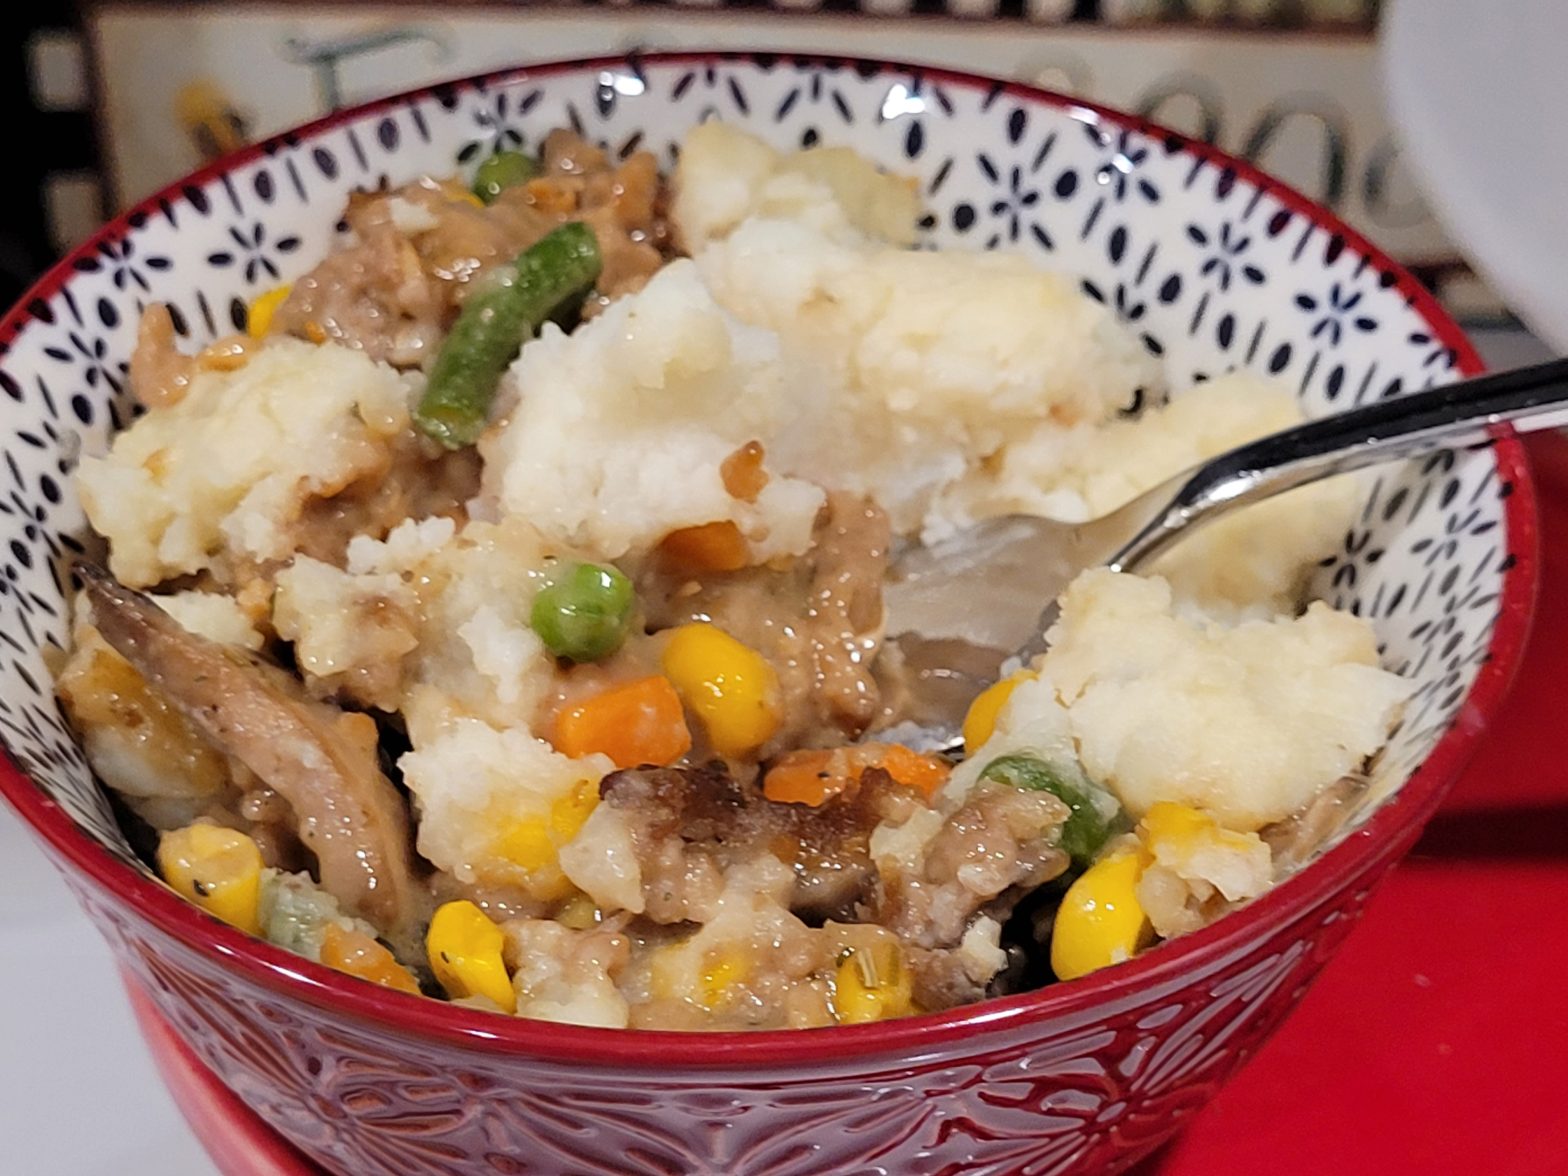 A bowl of food with meat and vegetables.